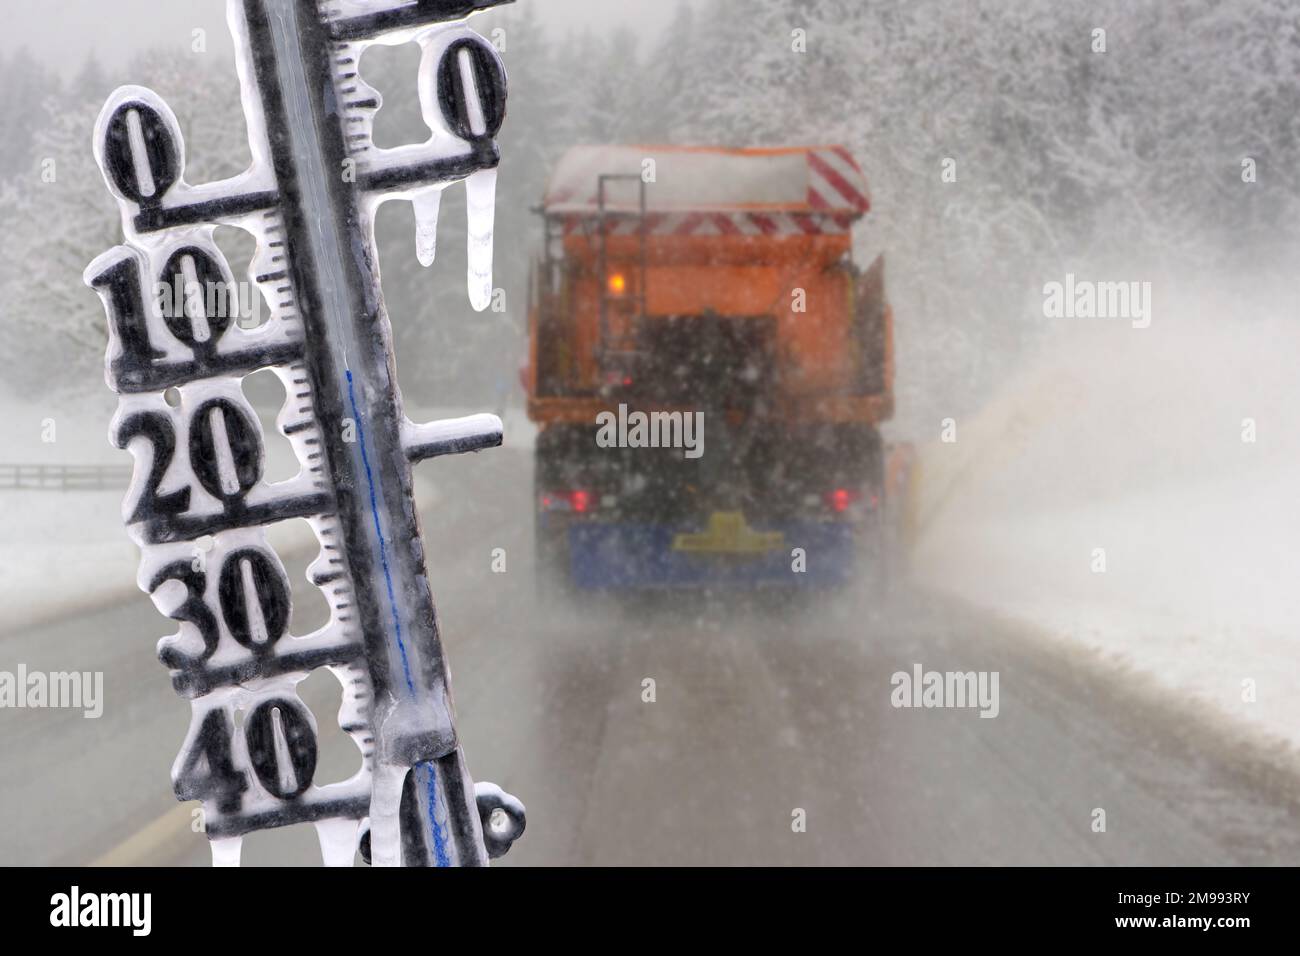 Thermometer shows cold temperatures on road Stock Photo